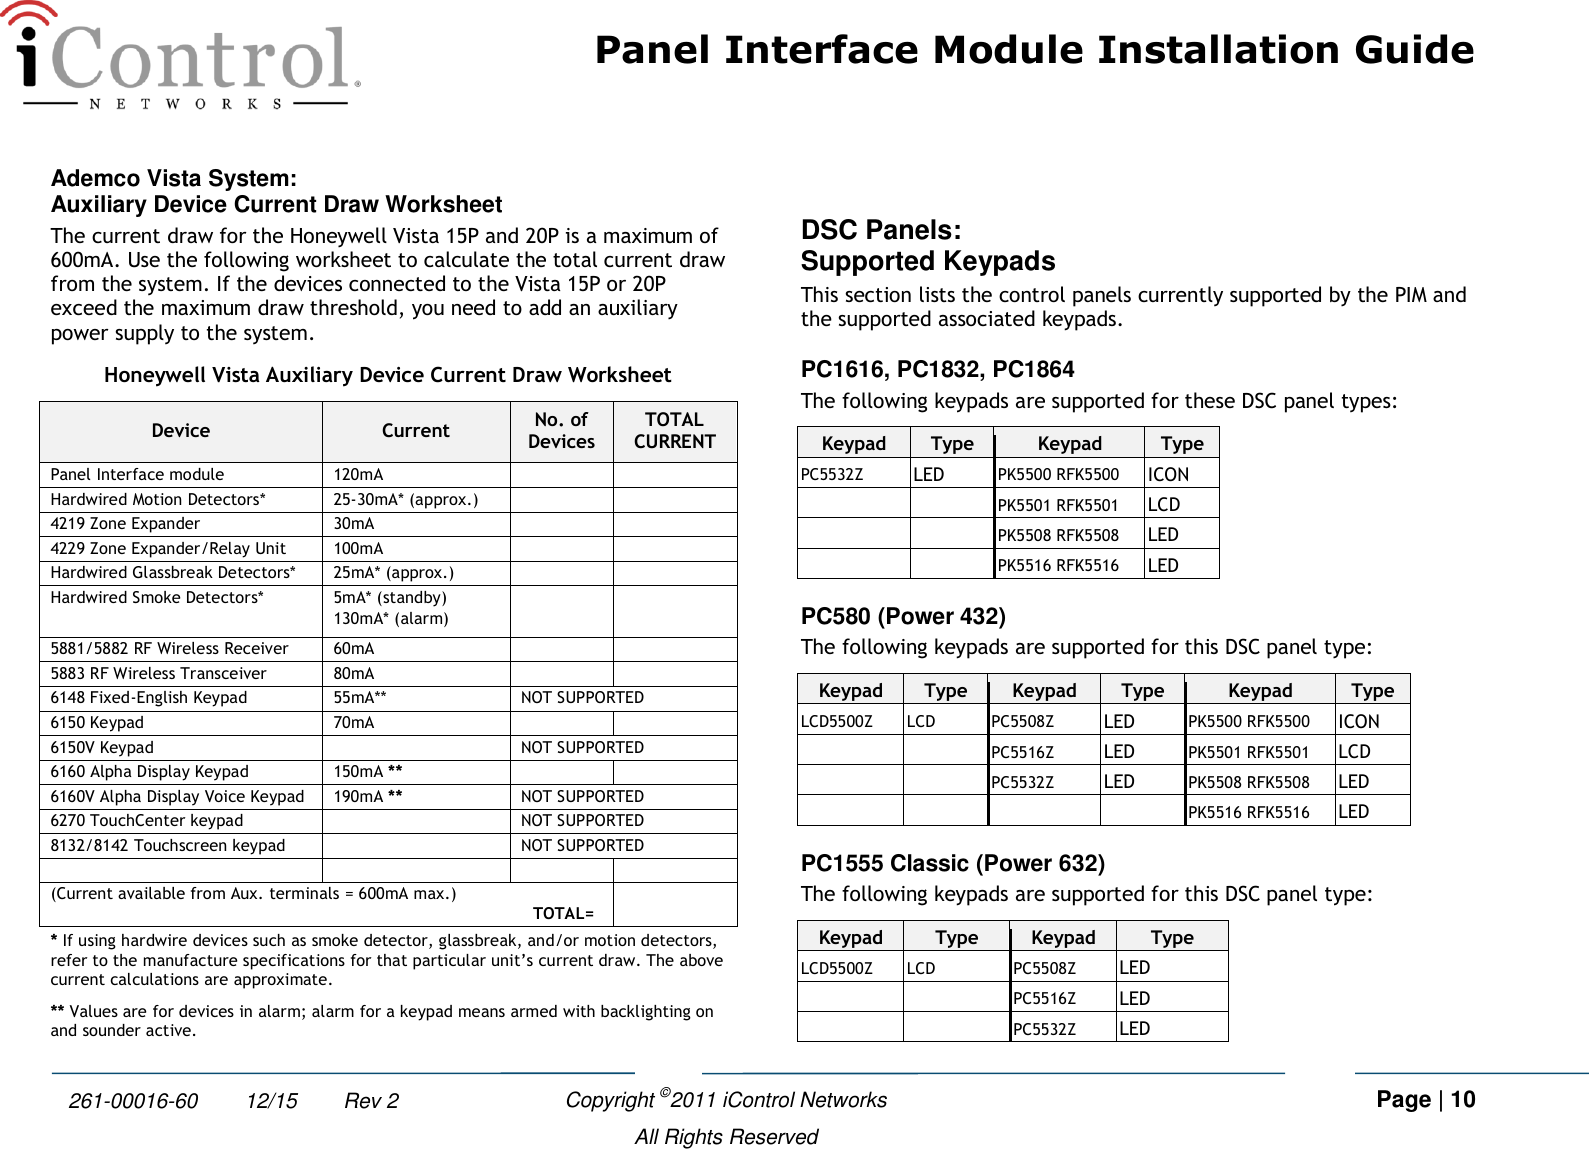 Panel Interface Module Installation Guide    Copyright ©2011 iControl Networks   Page | 10  All Rights Reserved 261-00016-60        12/15        Rev 2 Ademco Vista System: Auxiliary Device Current Draw Worksheet The current draw for the Honeywell Vista 15P and 20P is a maximum of 600mA. Use the following worksheet to calculate the total current draw from the system. If the devices connected to the Vista 15P or 20P exceed the maximum draw threshold, you need to add an auxiliary power supply to the system.  Honeywell Vista Auxiliary Device Current Draw Worksheet Device Current No. of Devices TOTAL CURRENT Panel Interface module 120mA   Hardwired Motion Detectors* 25-30mA* (approx.)   4219 Zone Expander 30mA   4229 Zone Expander/Relay Unit 100mA    Hardwired Glassbreak Detectors* 25mA* (approx.)   Hardwired Smoke Detectors* 5mA* (standby) 130mA* (alarm)   5881/5882 RF Wireless Receiver 60mA   5883 RF Wireless Transceiver 80mA   6148 Fixed-English Keypad 55mA** NOT SUPPORTED 6150 Keypad 70mA   6150V Keypad  NOT SUPPORTED 6160 Alpha Display Keypad 150mA **   6160V Alpha Display Voice Keypad 190mA ** NOT SUPPORTED 6270 TouchCenter keypad  NOT SUPPORTED 8132/8142 Touchscreen keypad  NOT SUPPORTED     (Current available from Aux. terminals = 600mA max.)  TOTAL=  * If using hardwire devices such as smoke detector, glassbreak, and/or motion detectors, refer to the manufacture specifications for that particular unit’s current draw. The above current calculations are approximate. ** Values are for devices in alarm; alarm for a keypad means armed with backlighting on and sounder active.  DSC Panels: Supported Keypads This section lists the control panels currently supported by the PIM and the supported associated keypads. PC1616, PC1832, PC1864 The following keypads are supported for these DSC panel types: Keypad Type Keypad Type PC5532Z LED PK5500 RFK5500 ICON   PK5501 RFK5501 LCD   PK5508 RFK5508 LED   PK5516 RFK5516 LED PC580 (Power 432) The following keypads are supported for this DSC panel type: Keypad Type Keypad Type Keypad Type LCD5500Z LCD PC5508Z LED PK5500 RFK5500 ICON   PC5516Z LED PK5501 RFK5501 LCD   PC5532Z LED PK5508 RFK5508 LED     PK5516 RFK5516 LED PC1555 Classic (Power 632)  The following keypads are supported for this DSC panel type: Keypad Type Keypad Type LCD5500Z LCD PC5508Z LED   PC5516Z LED   PC5532Z LED 